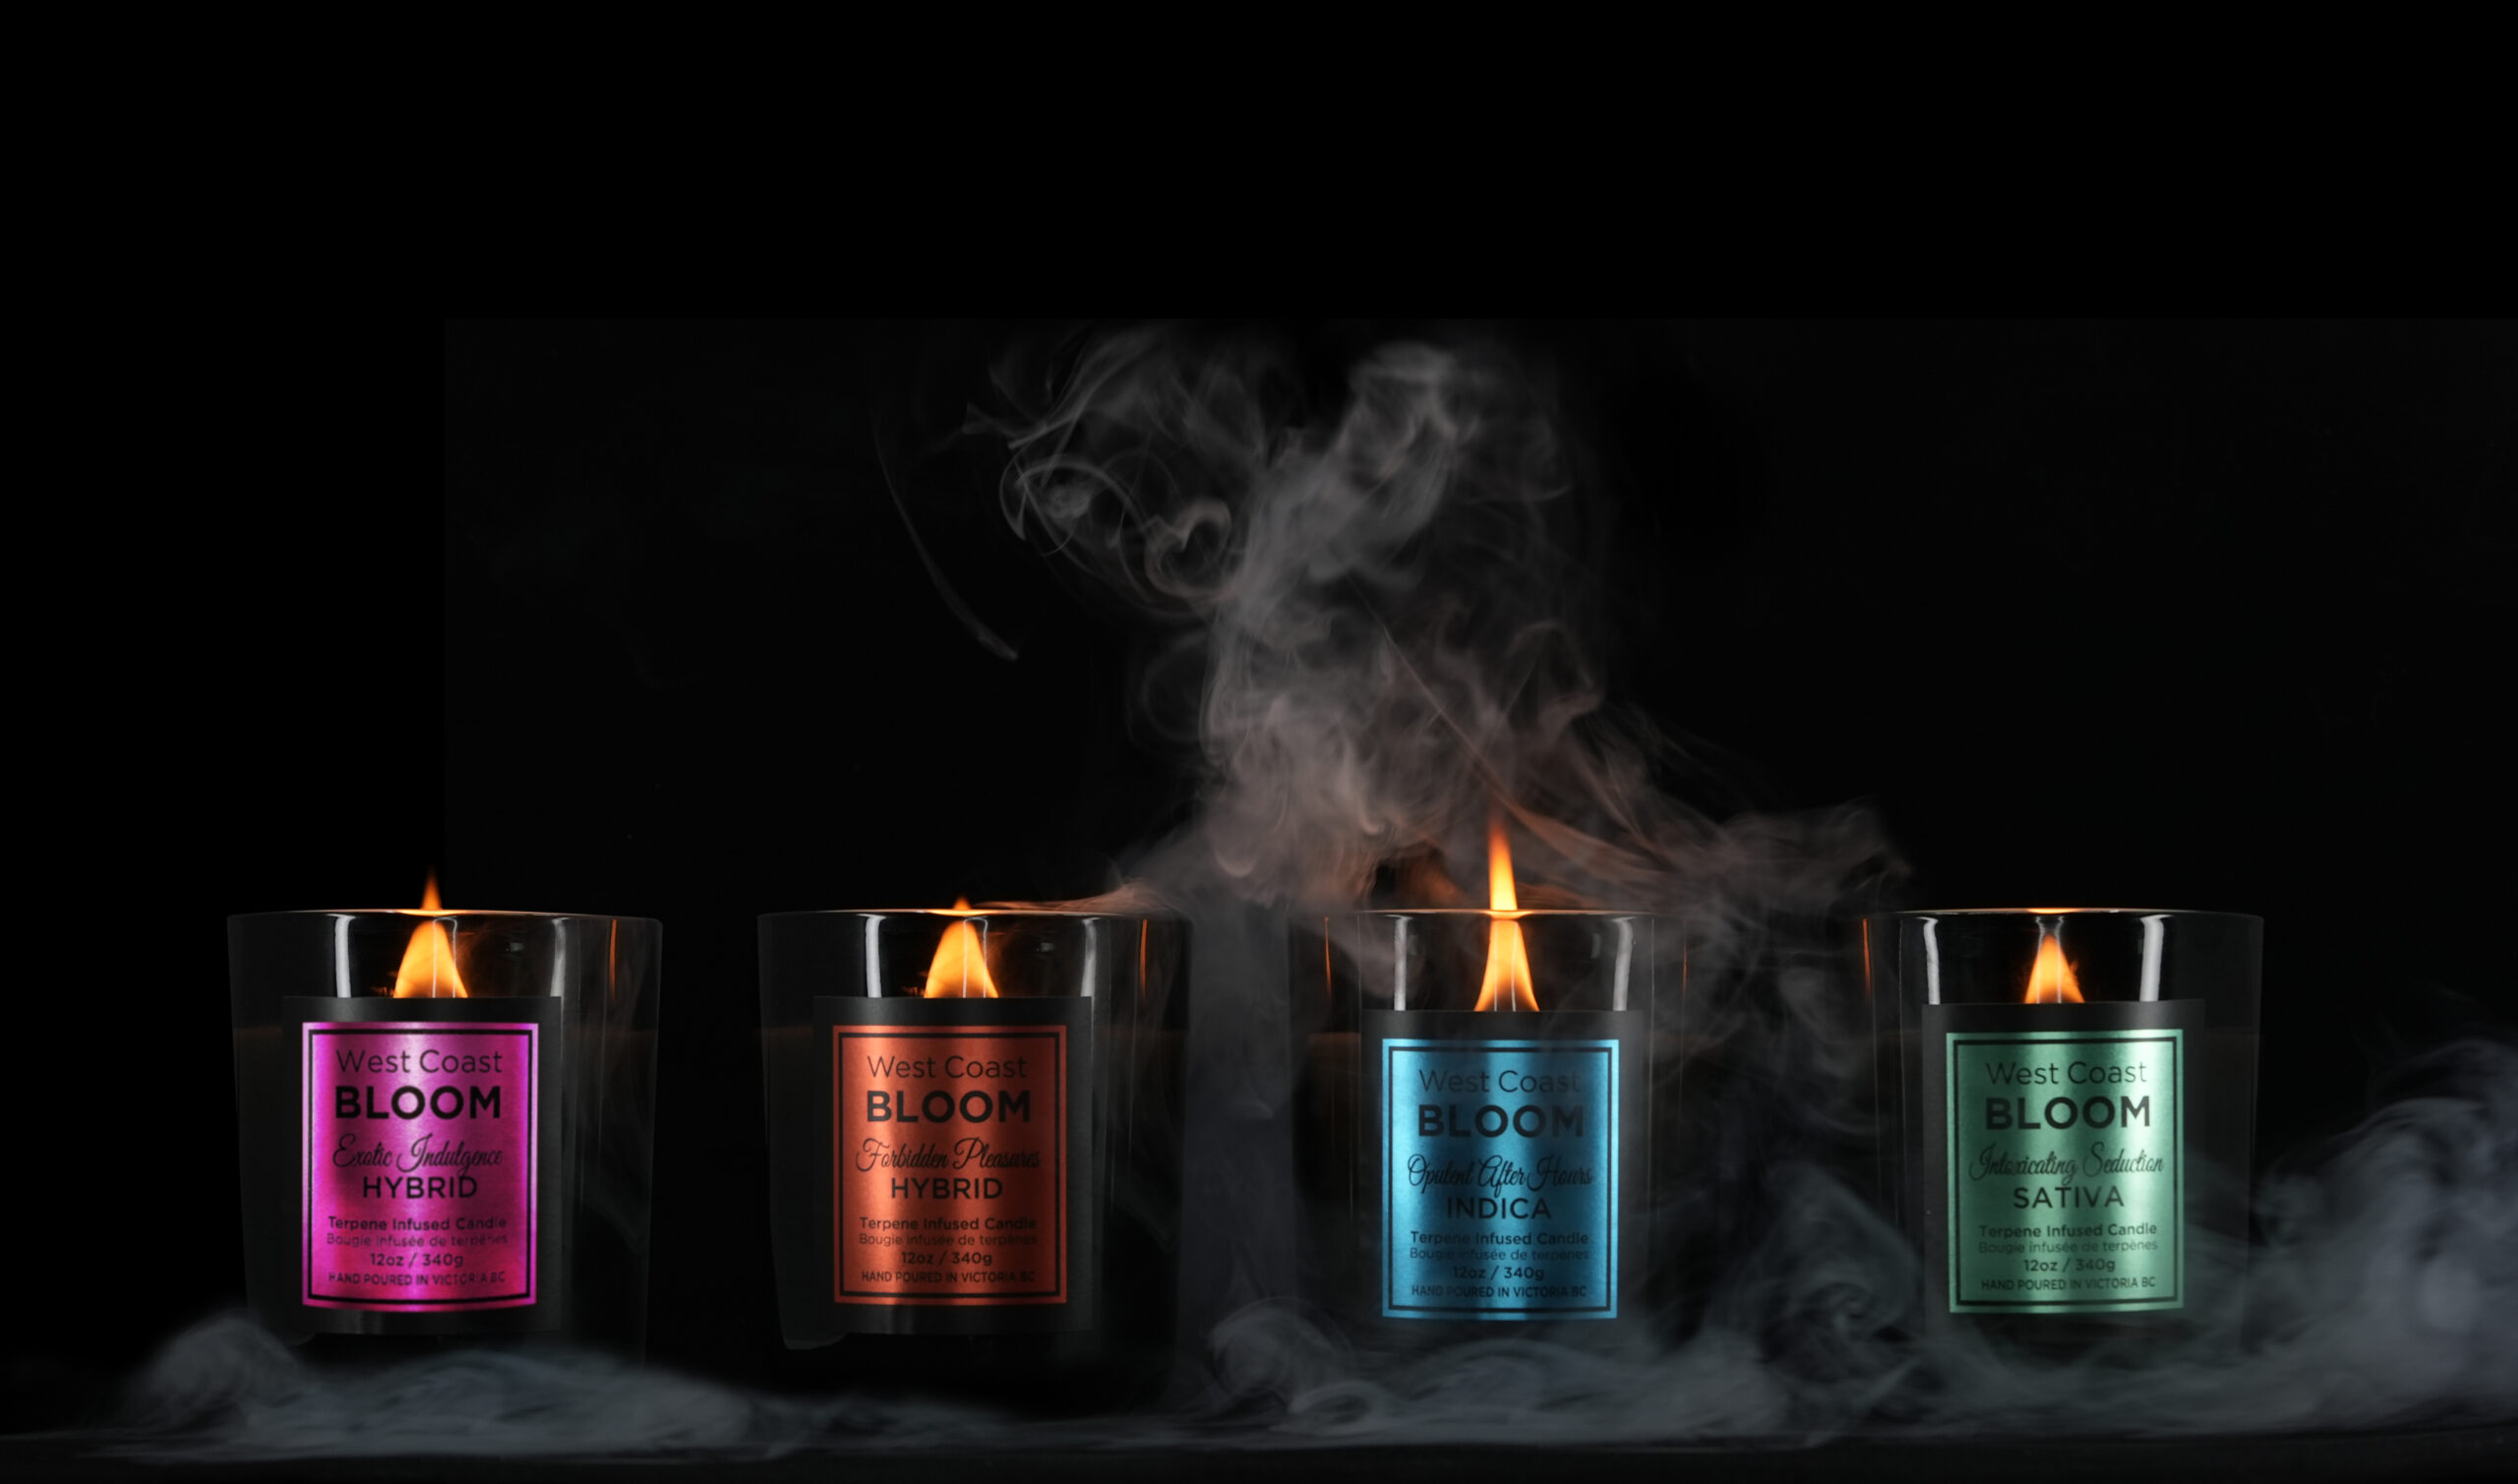 Luxury Candles by West Coast Bloom